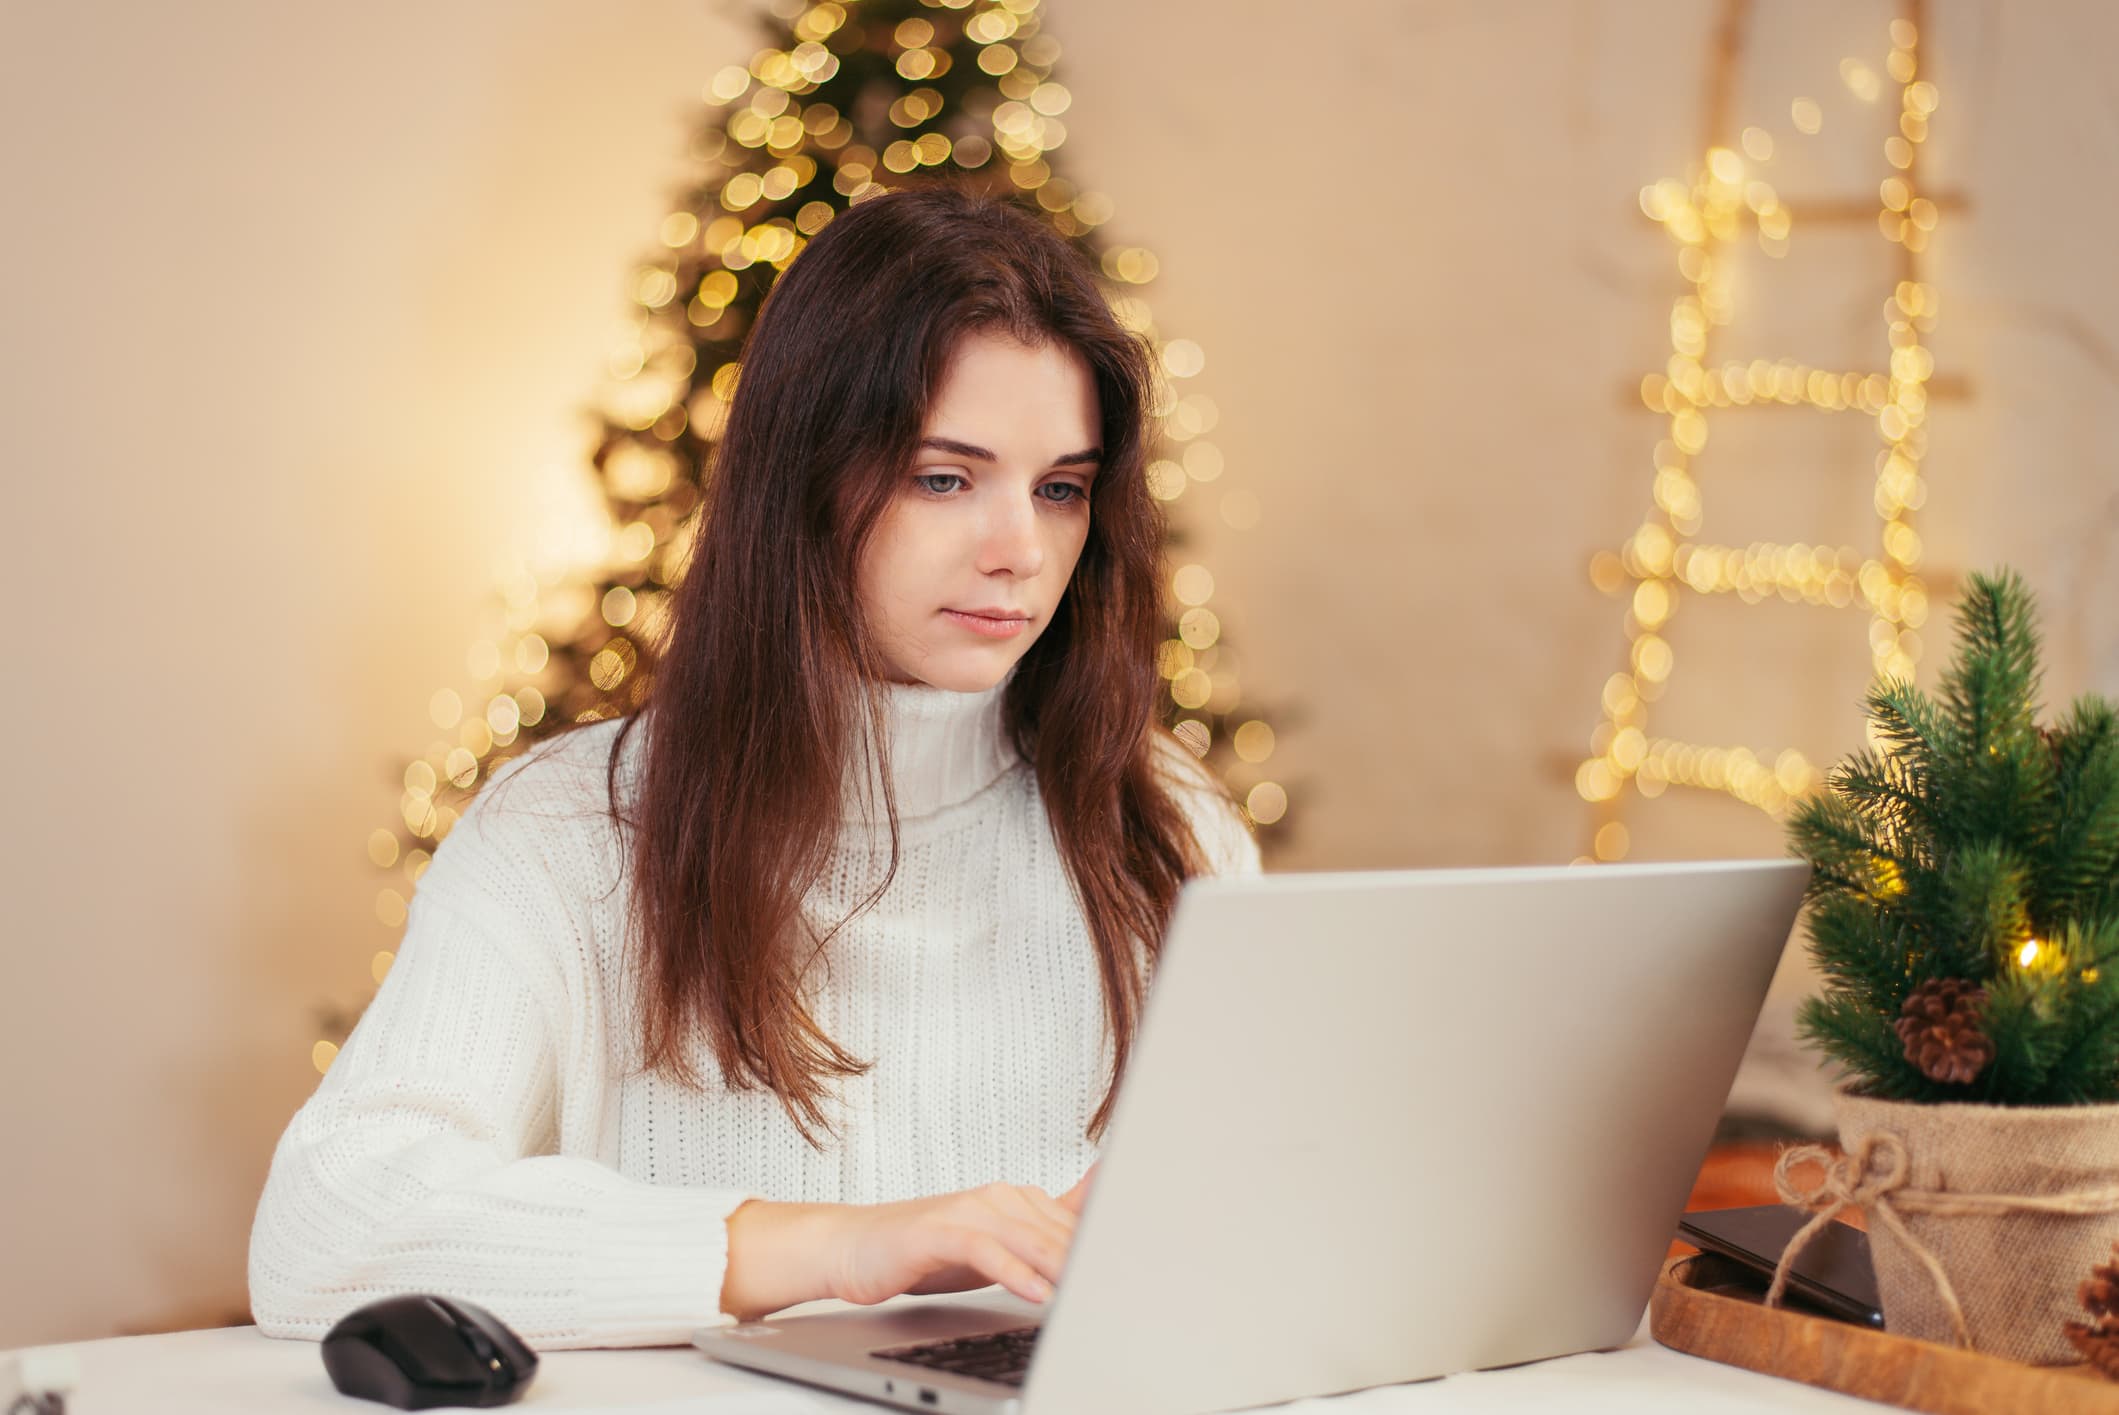 How to avoid holiday season burnout at work, according to experts